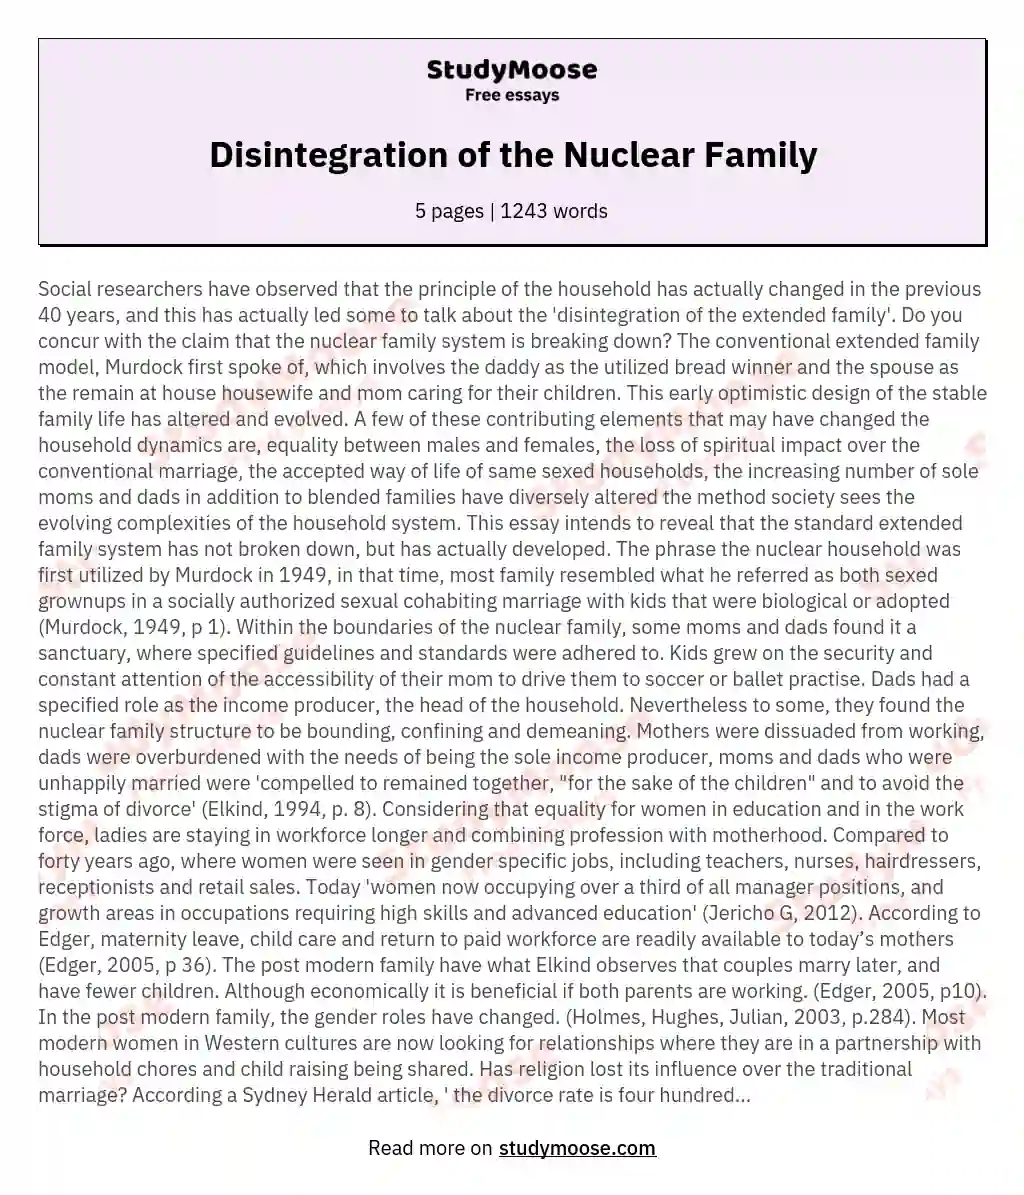 Disintegration of the Nuclear Family